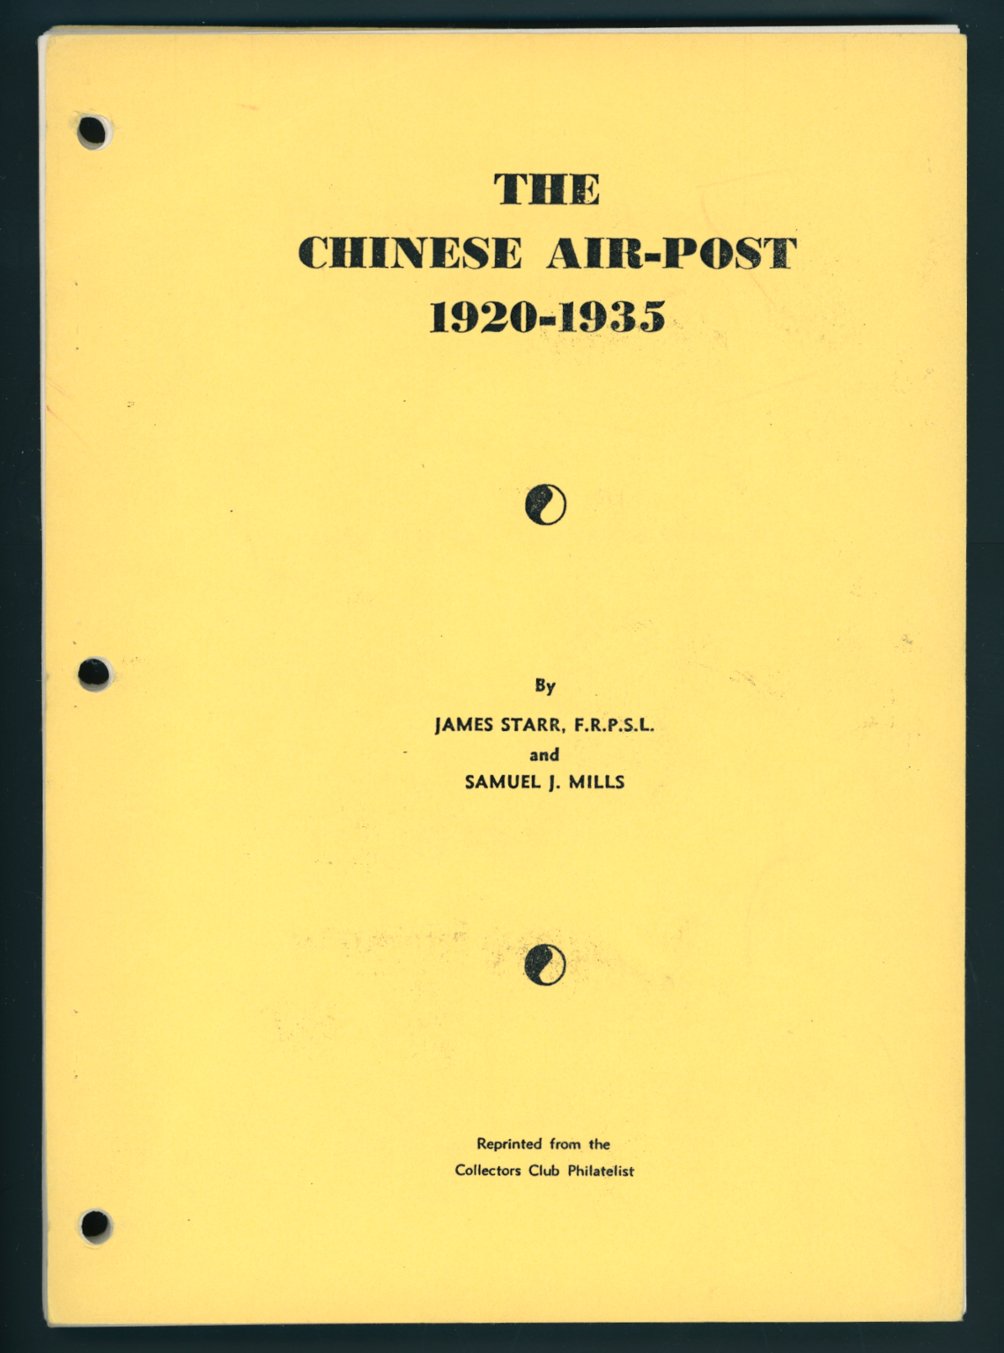 The Chinese Air-Post 1920-1935, by James Starr and Samuel J. Mills, 1932, in loose pages because the spine was removed to allow scanning for the CSS DVD, 112 pages, b/w (12 oz)